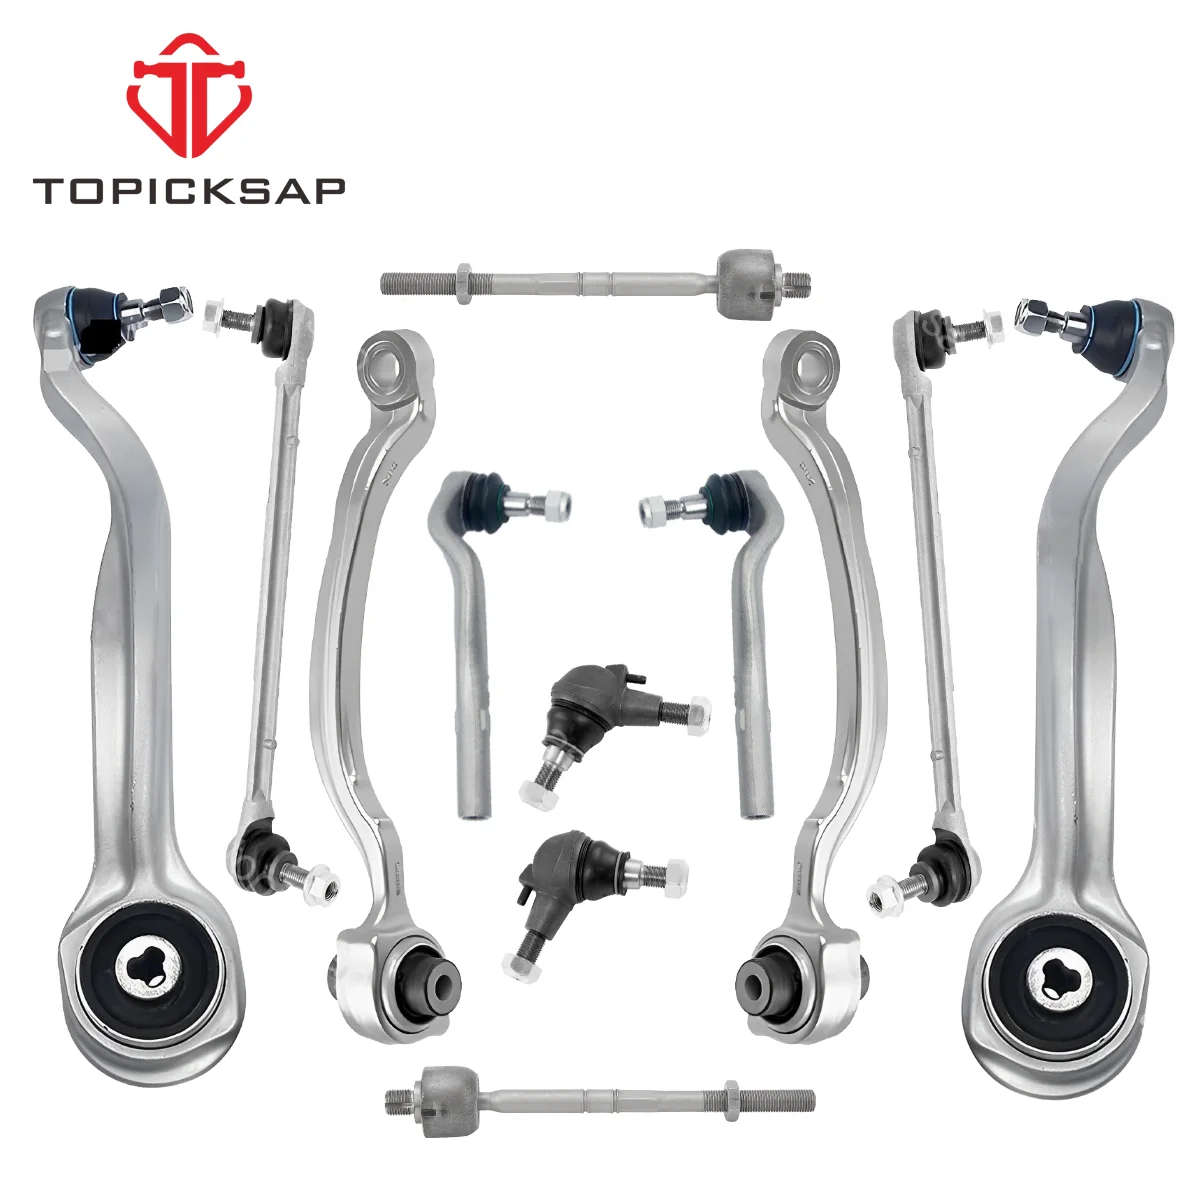 

TOPICKSAP Front Lower Control Arm Ball Joint Stabilizer Link Tie Rod Kits for Mercedes Benz W212 S212 E300 E250 E350 2009 - 2016